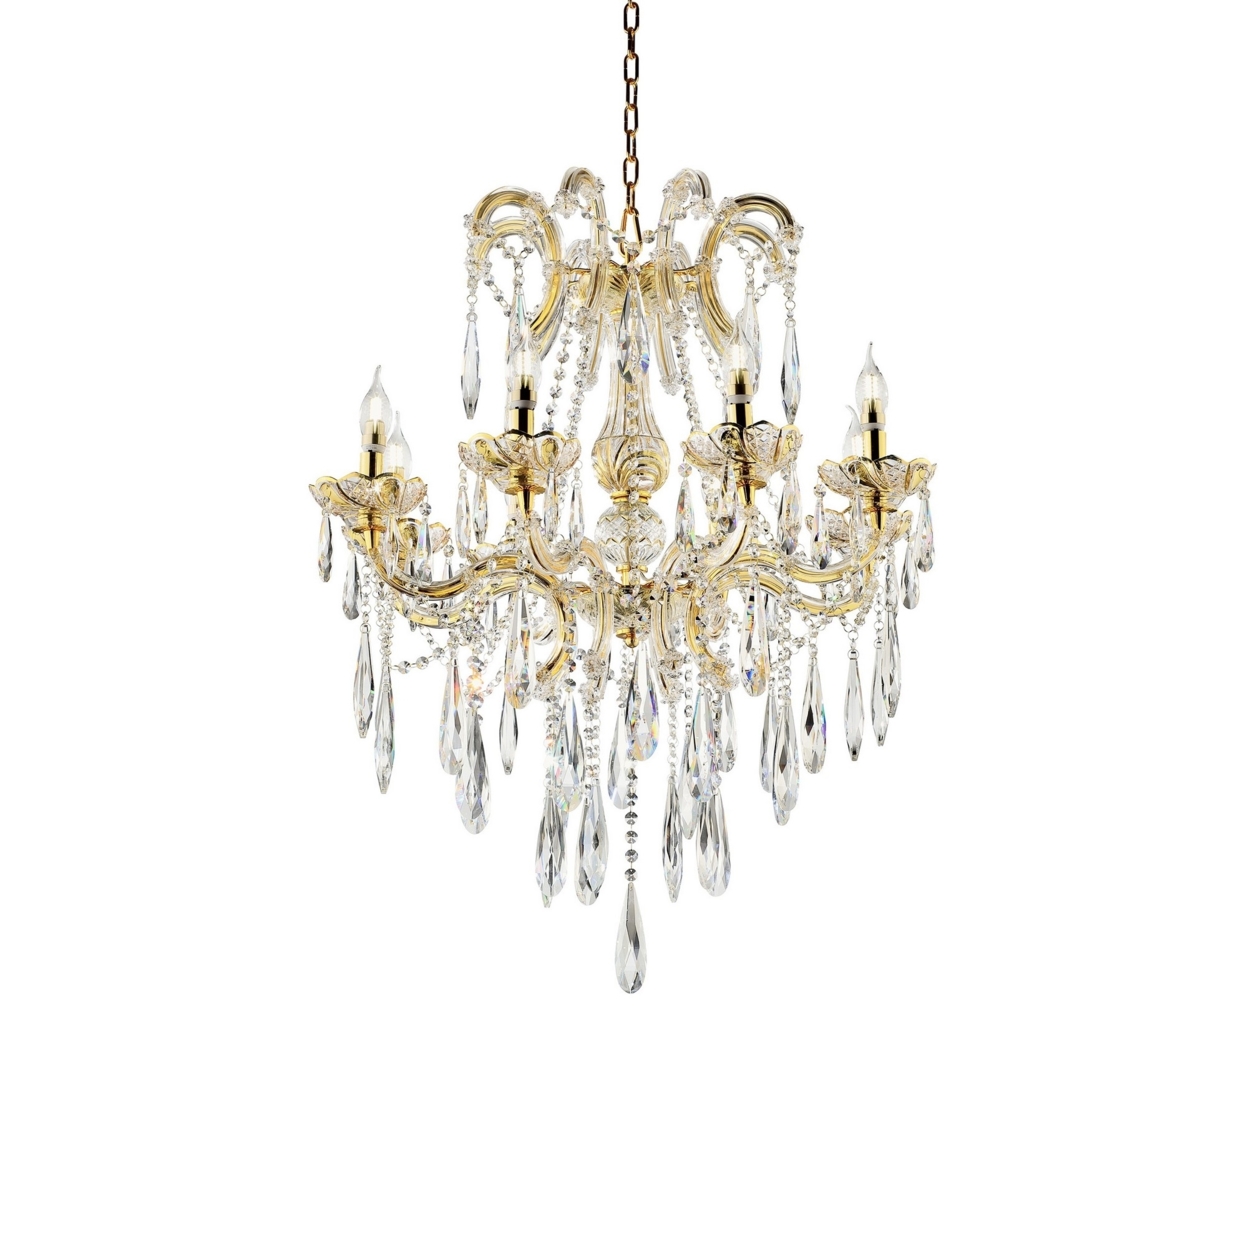 8 Light Metal Chandelier With Crystal Accents, Gold- Saltoro Sherpi